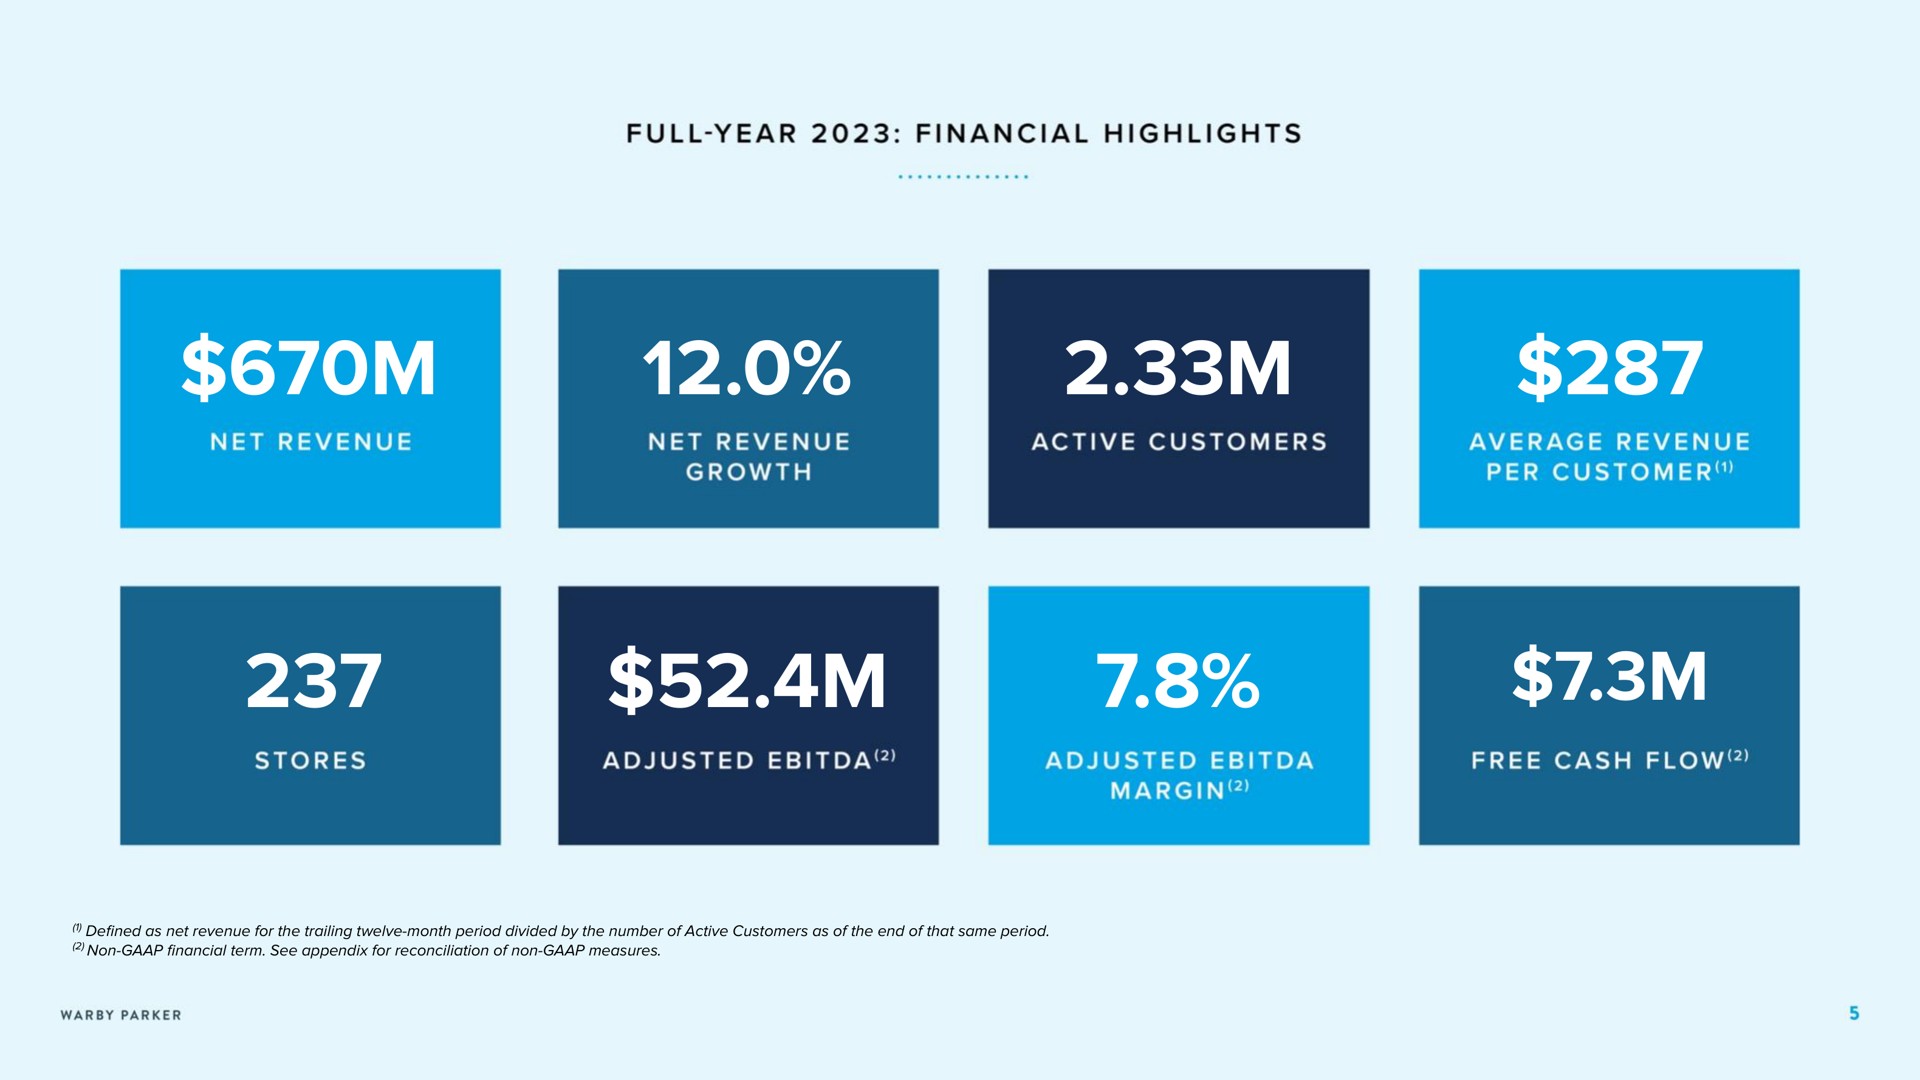 full year financial highlights | Warby Parker